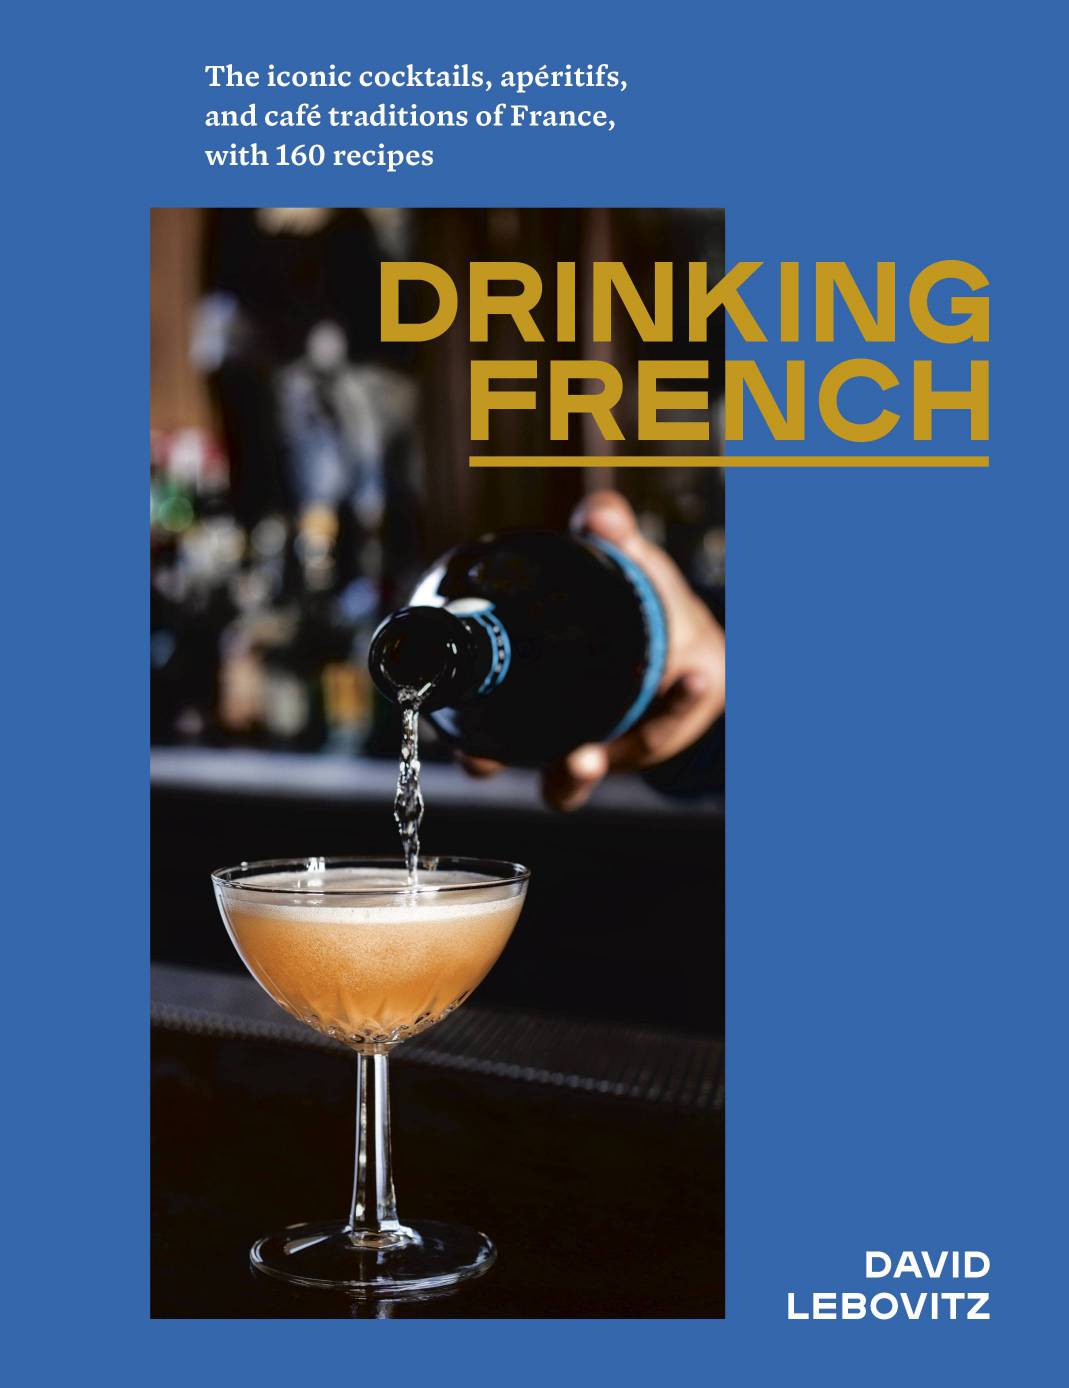 livre bouquin drinking French cocktails